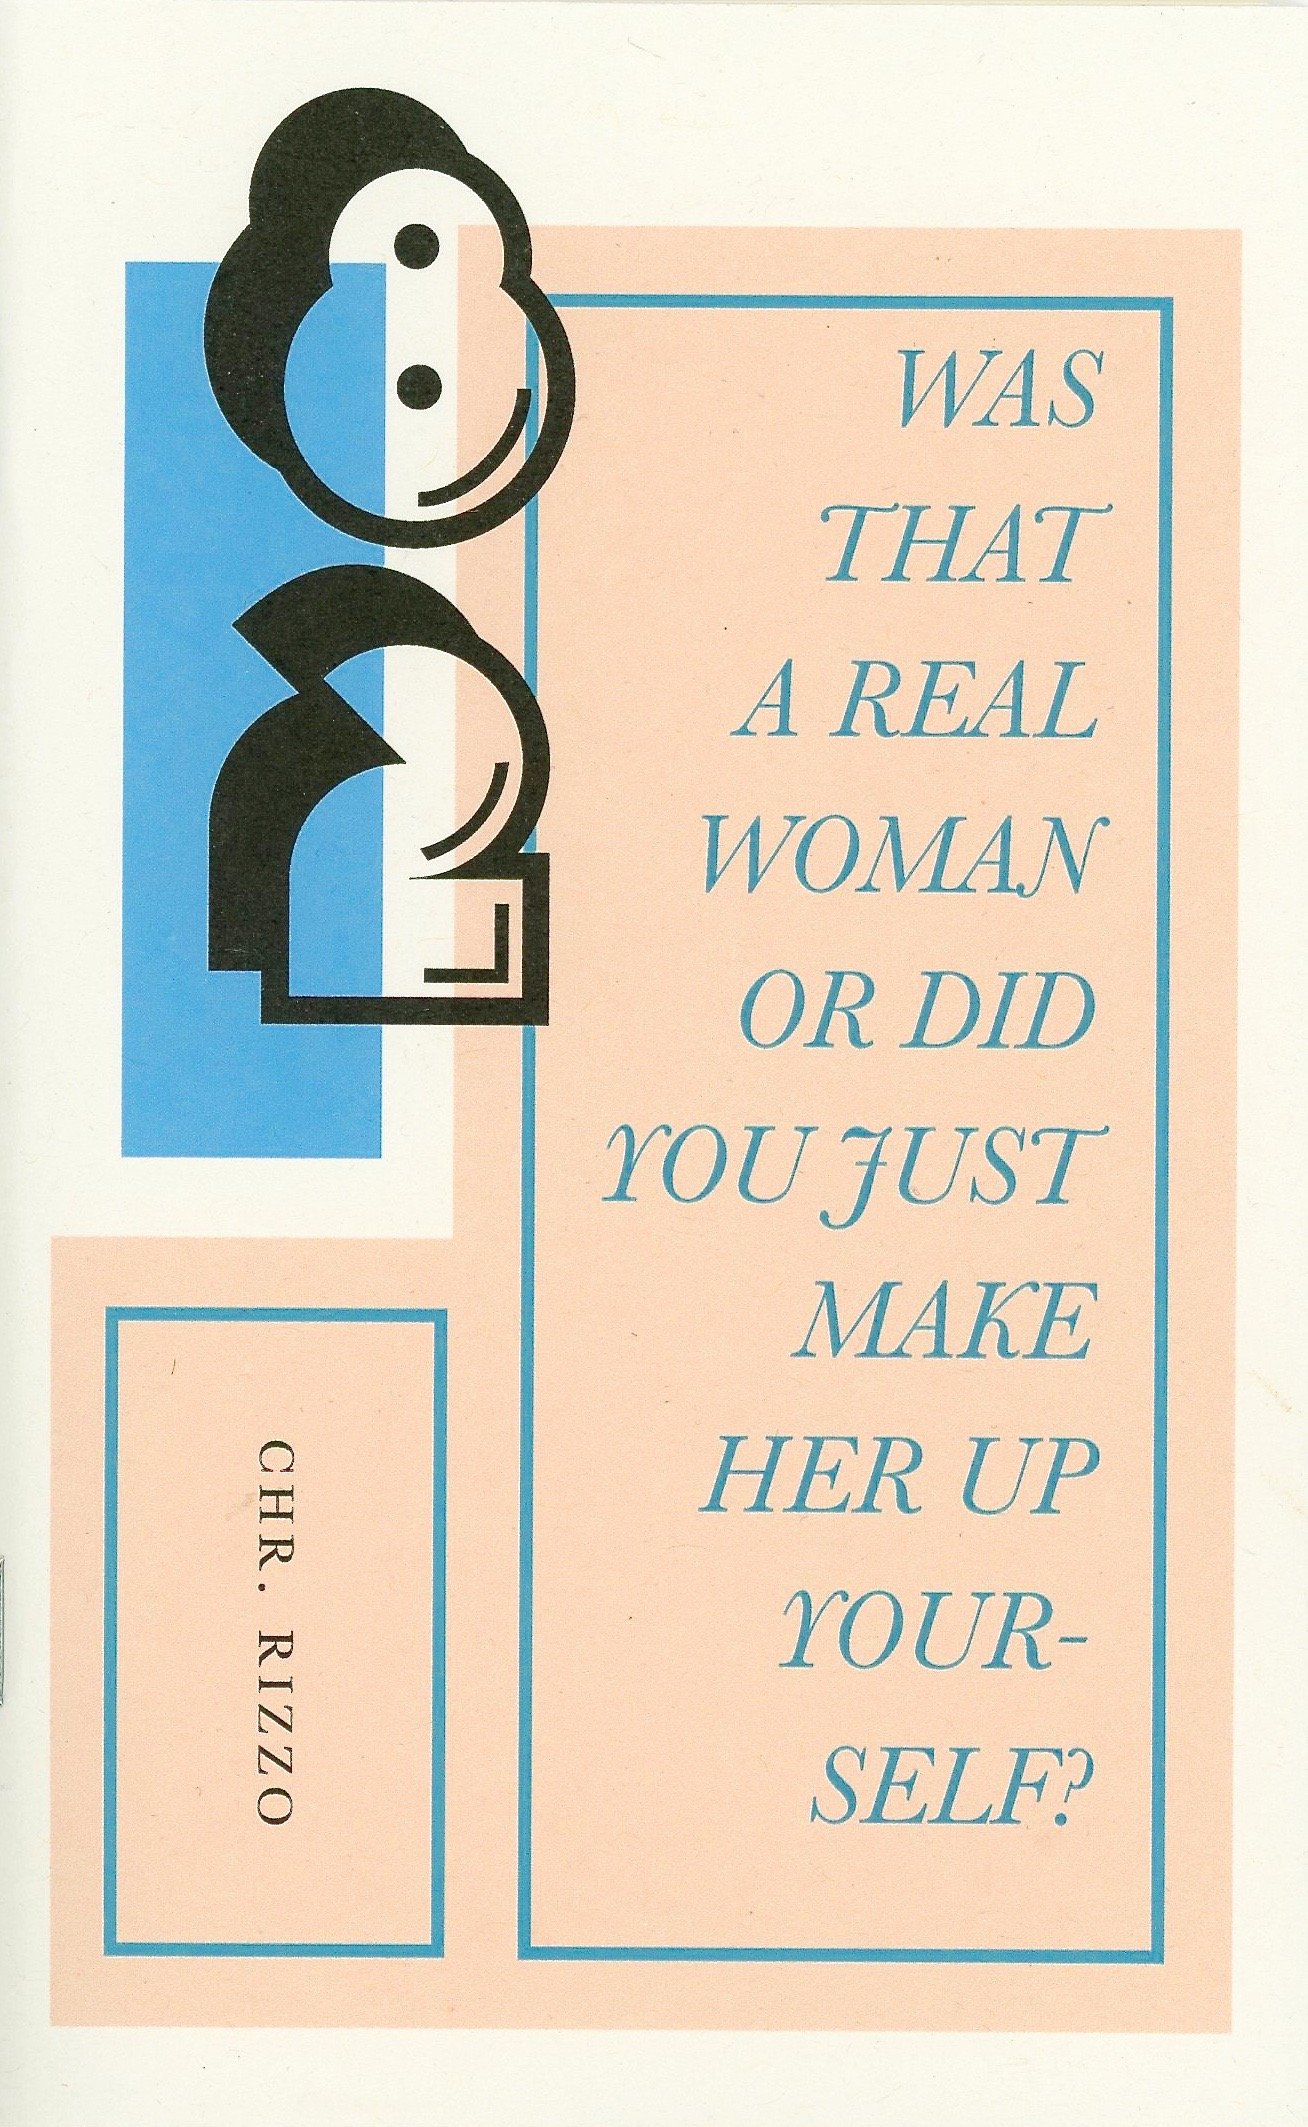 Was That A Real Woman Or Did You Just Make Her Up Yourself by Christopher Rizzo